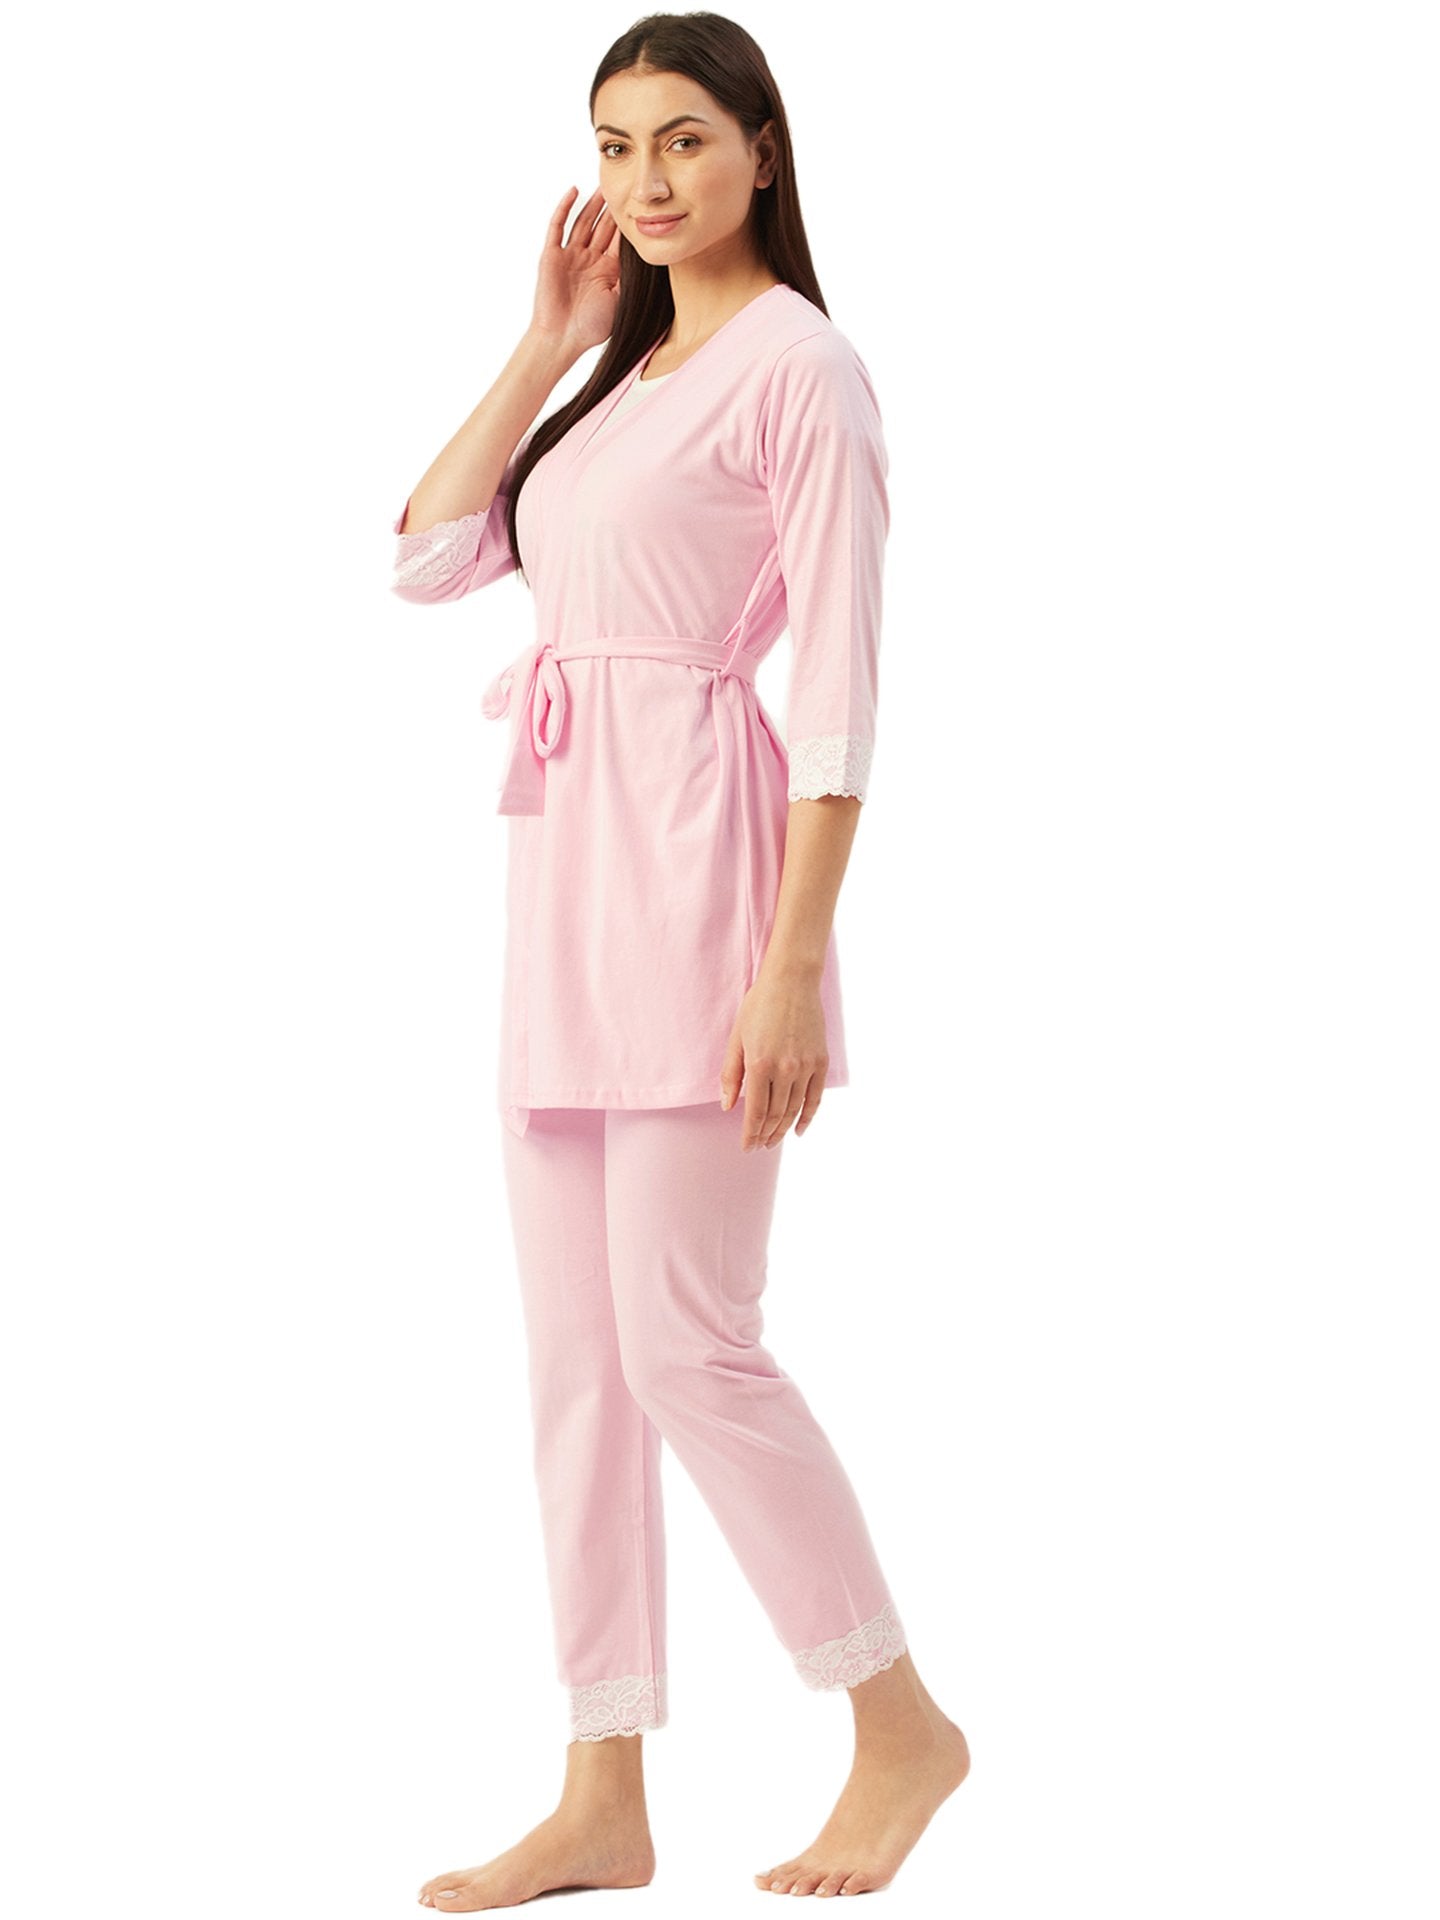 PLUS SIZE RESORT WEAR AND NIGHTSUITS AND COORD SETS